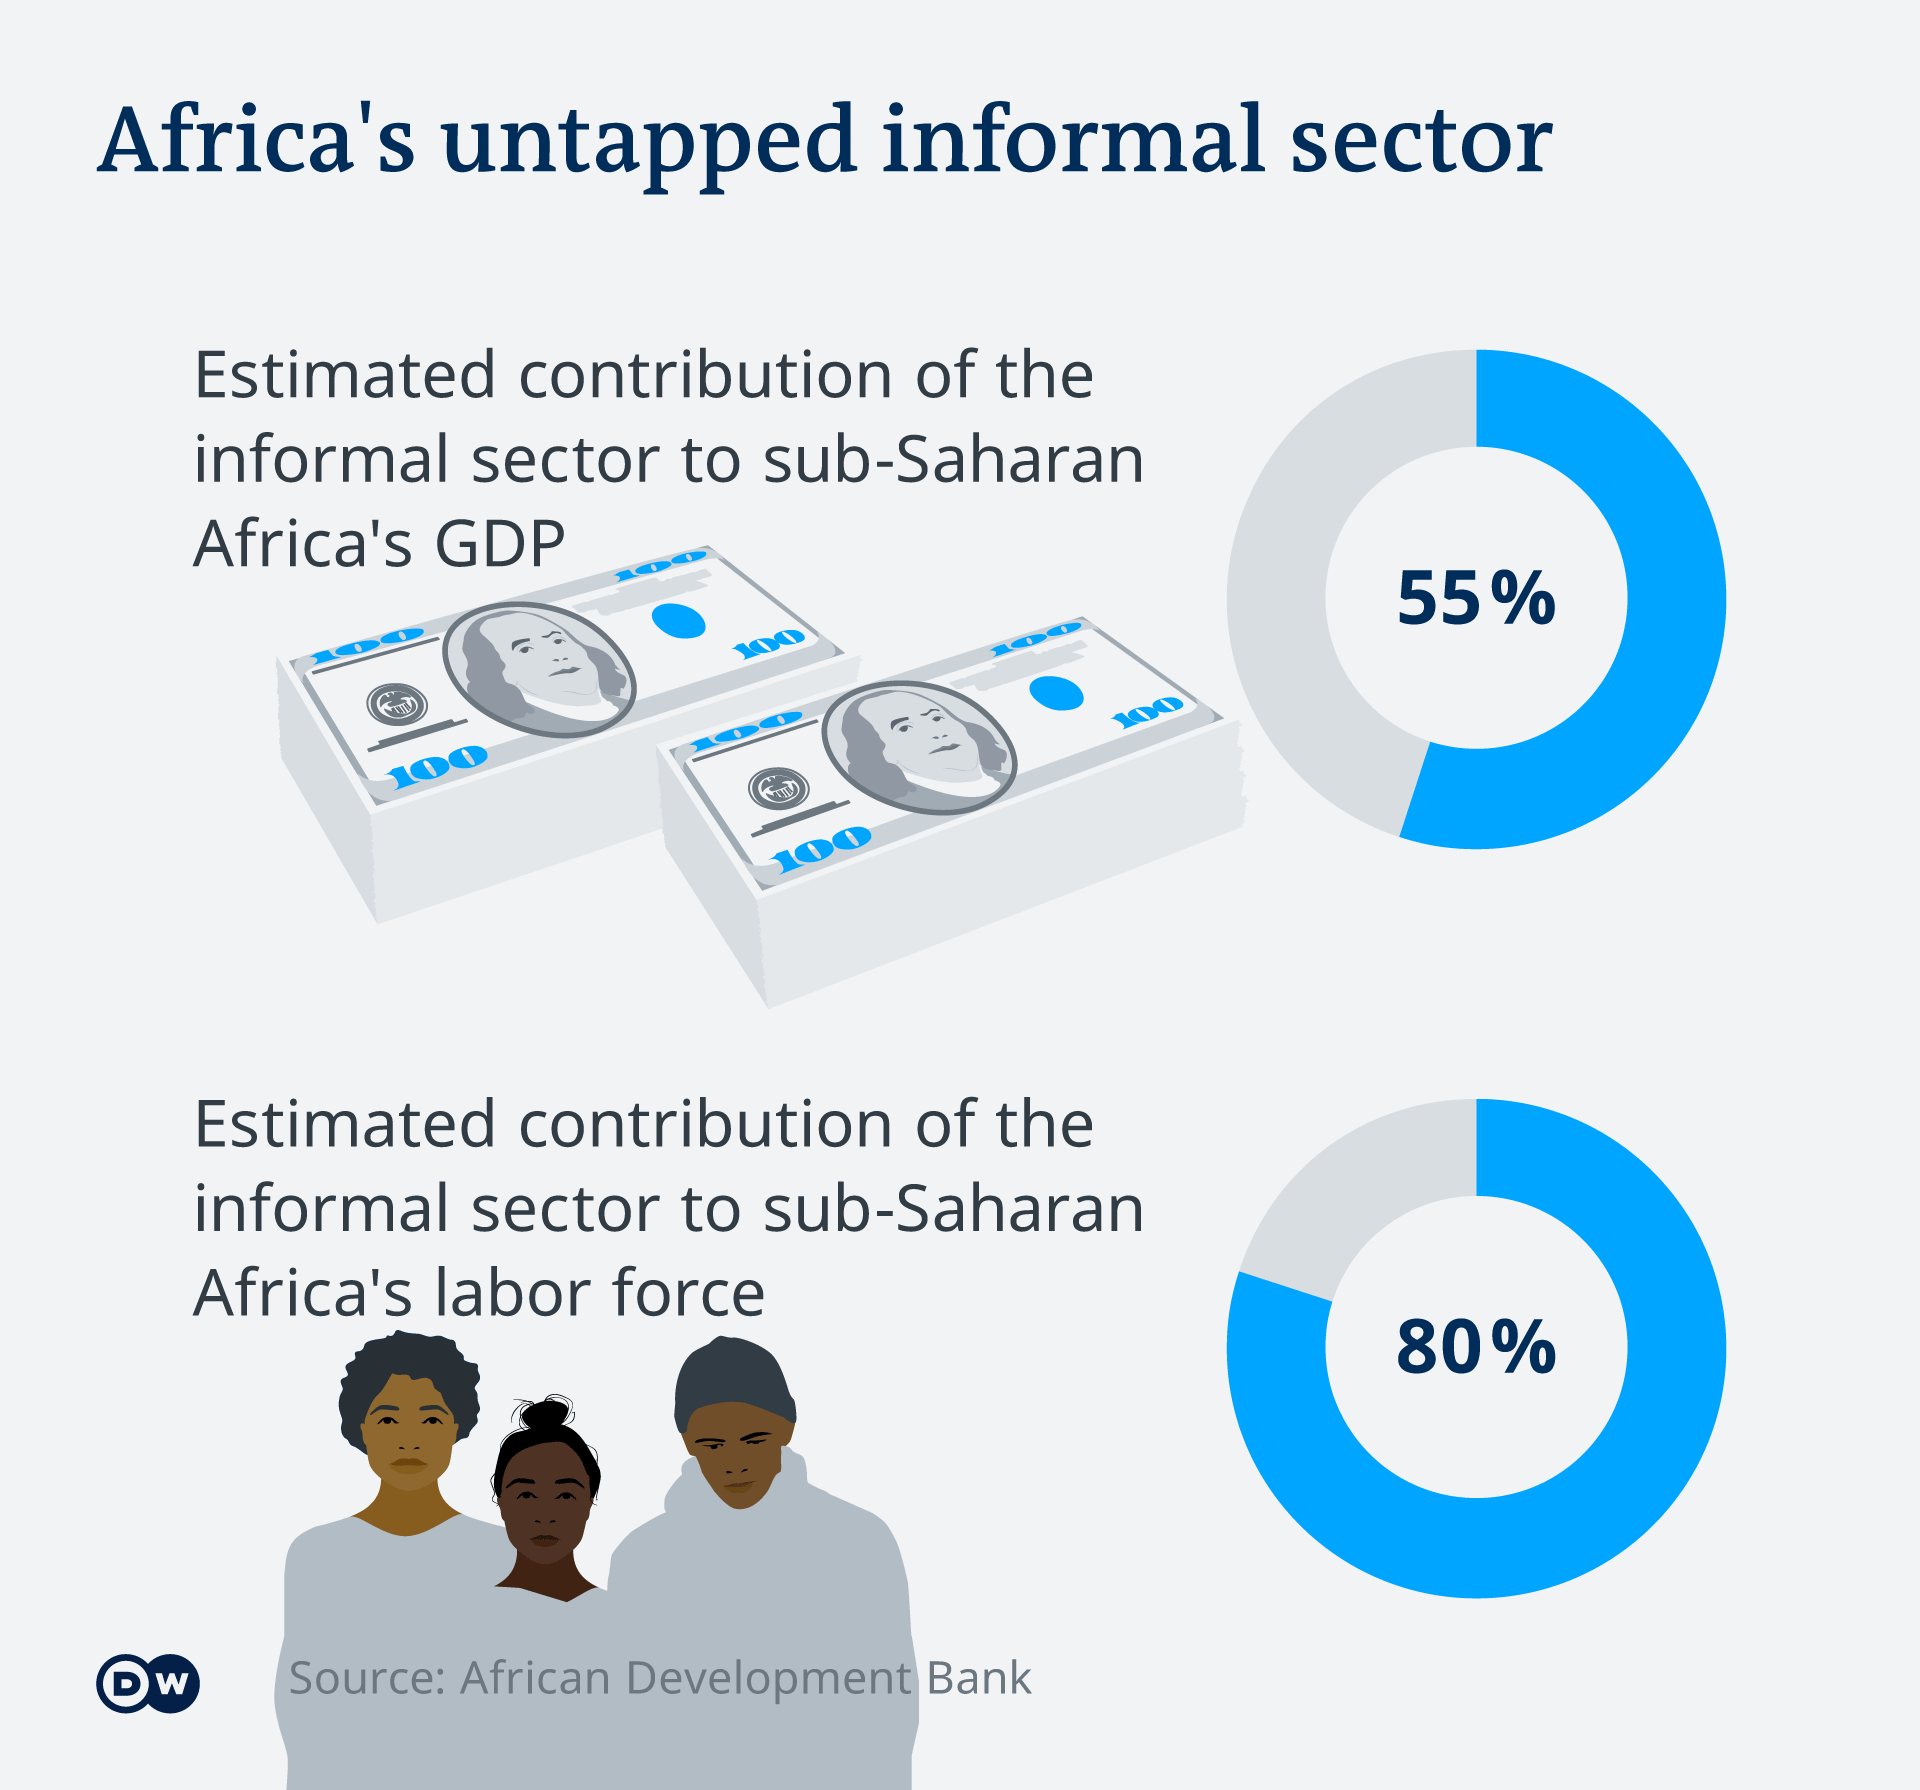 Infographic showing Africa's untapped informal sector